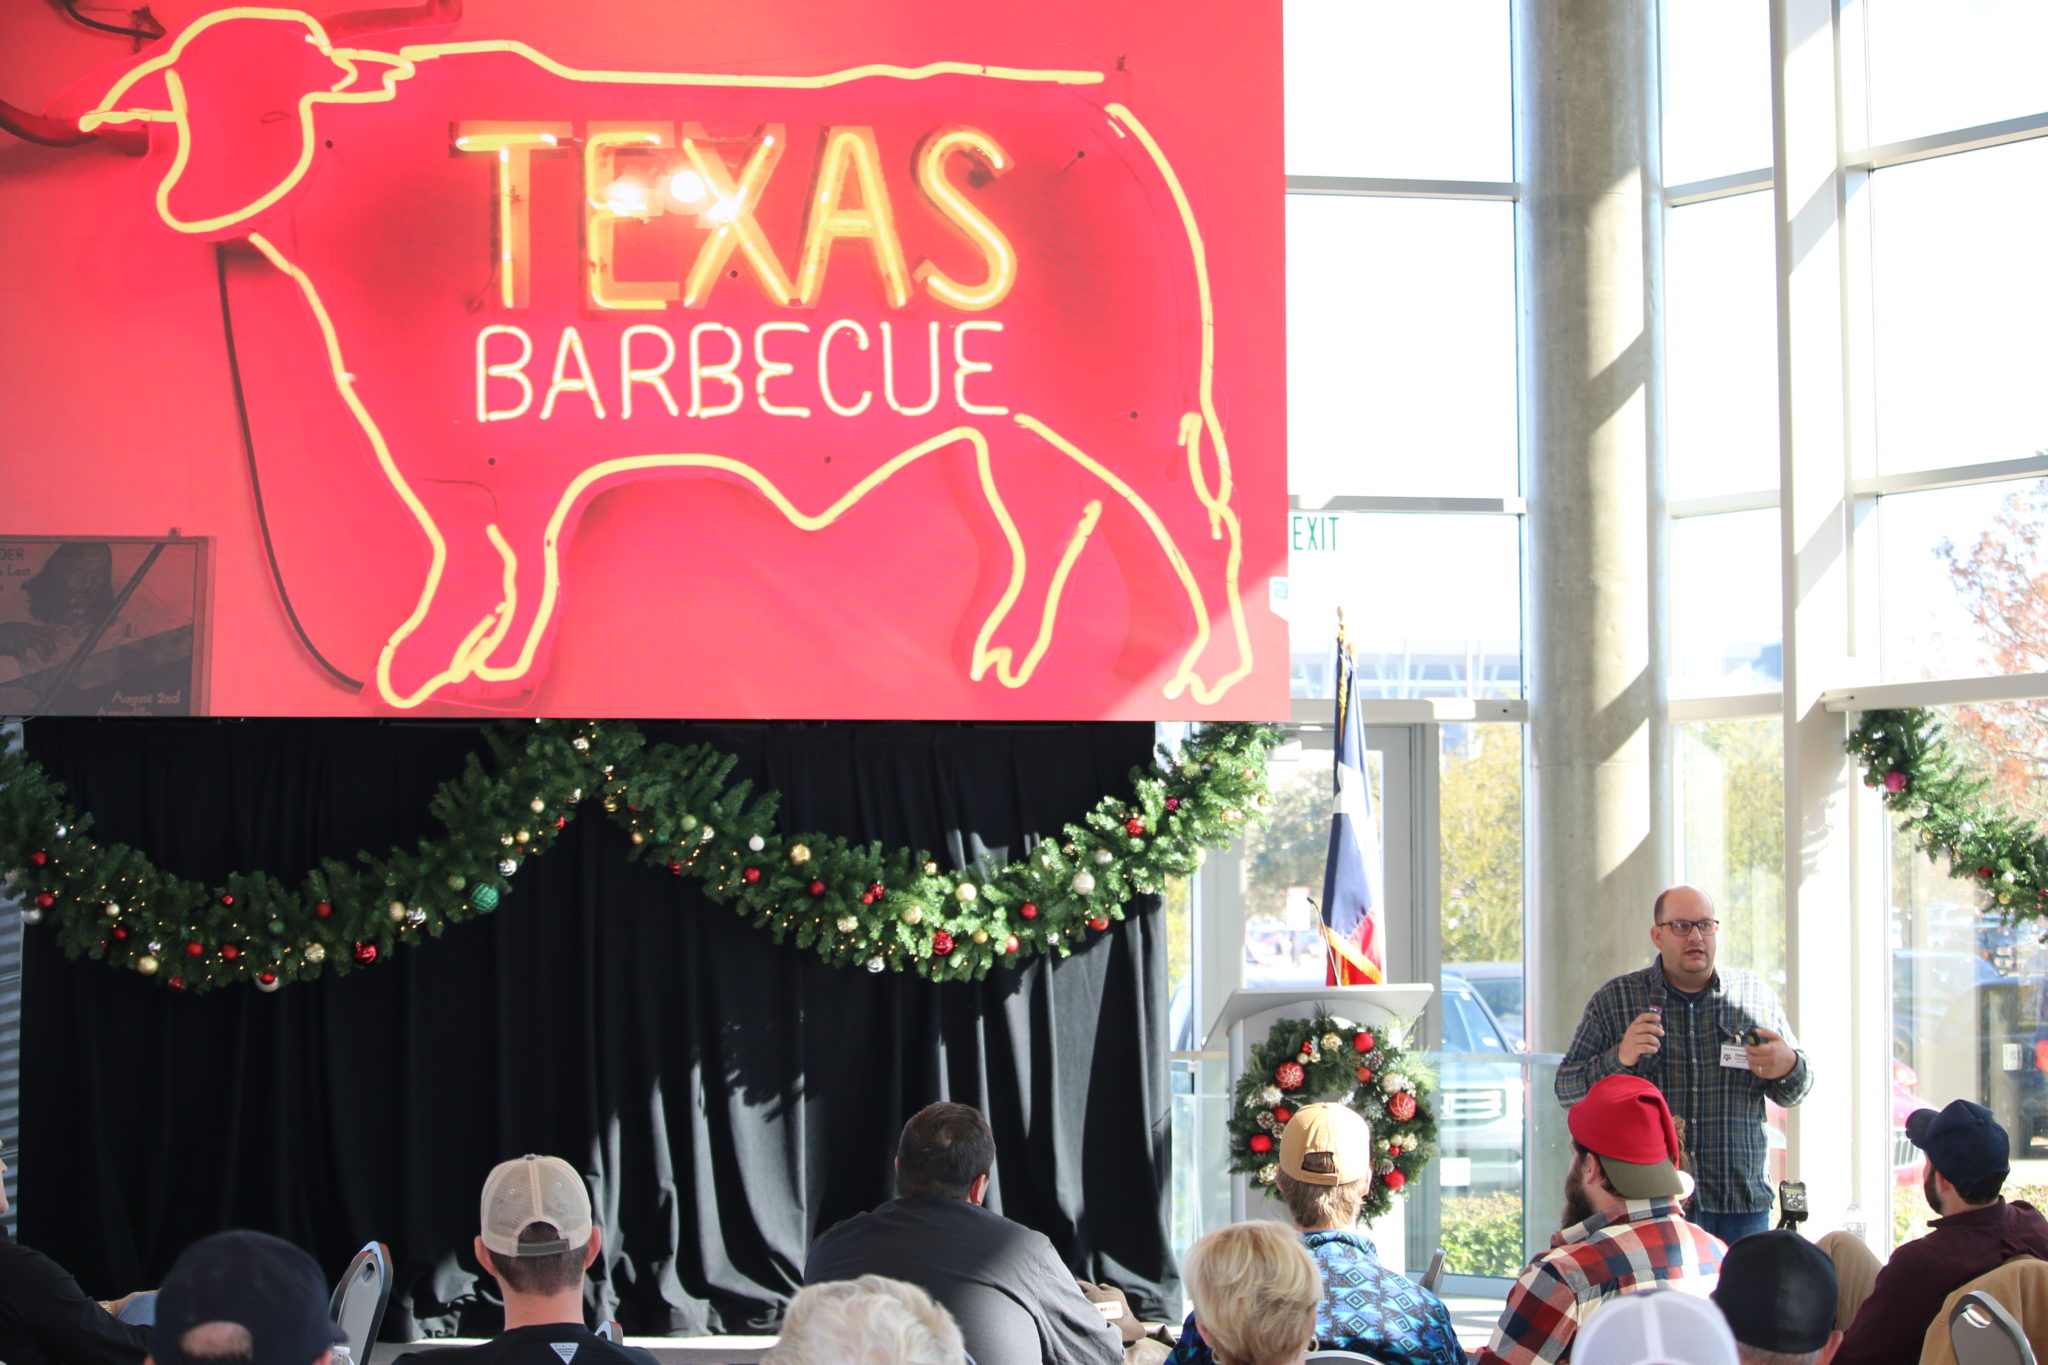 Daniel Vaughn, Texas Monthly Barbecue Editor, discussing what successful barbecue restaurants are doing